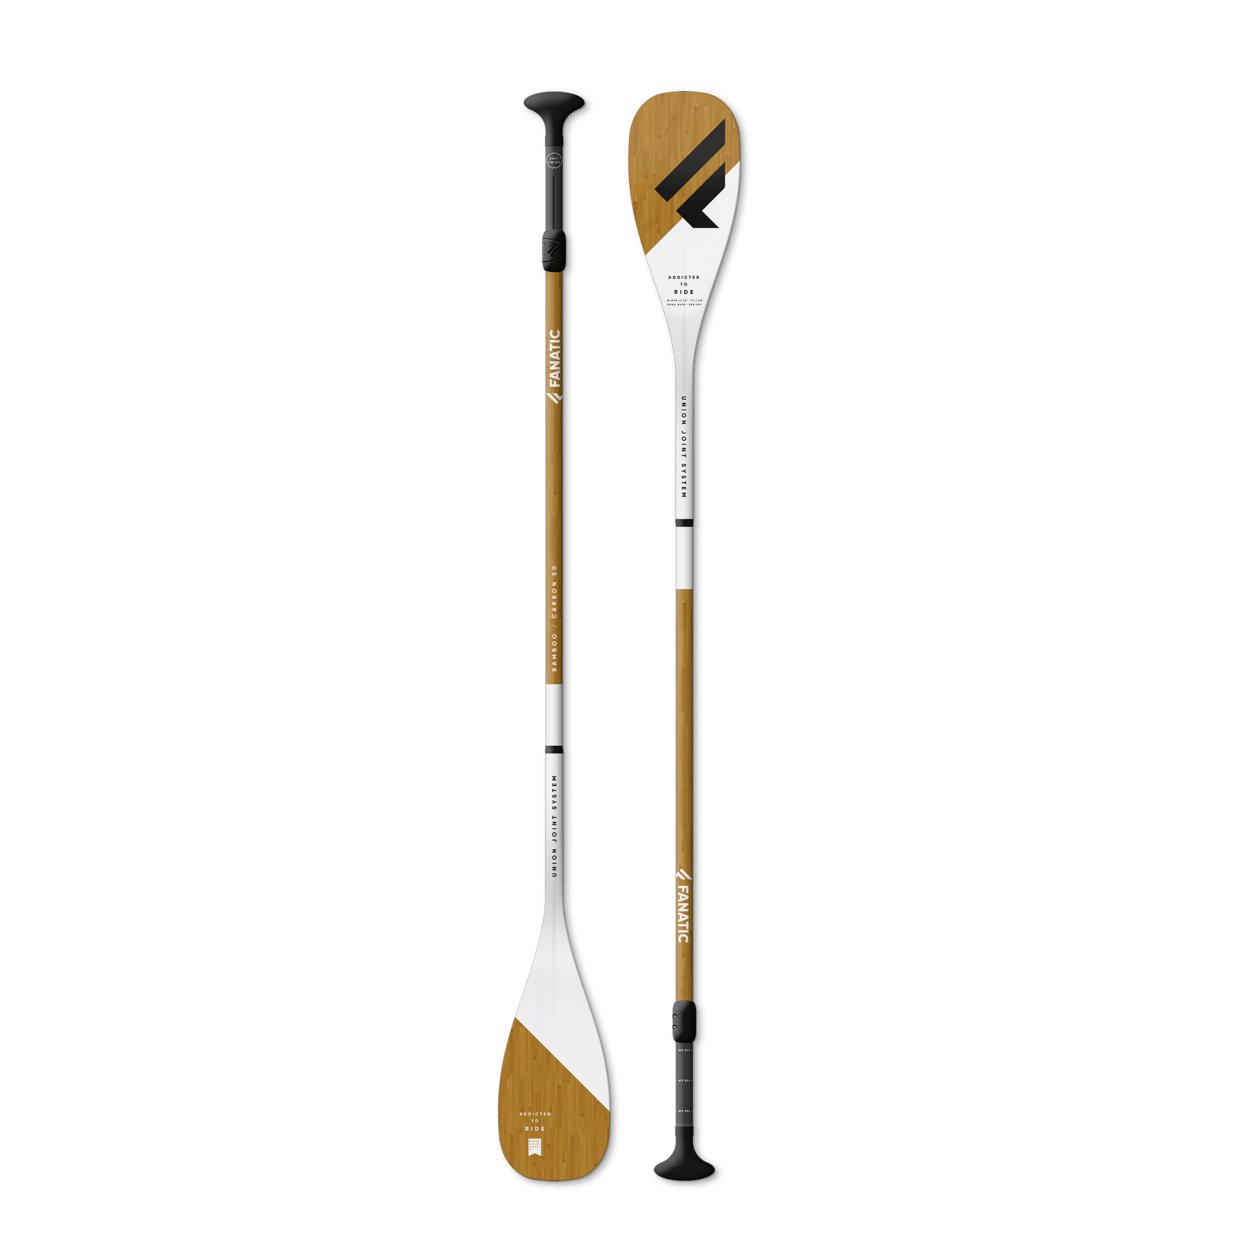 Fanatic Bamboo Carbon 50 Adjustable 2022 - Worthing Watersports - 9008415923243 - Paddles - Fanatic SUP